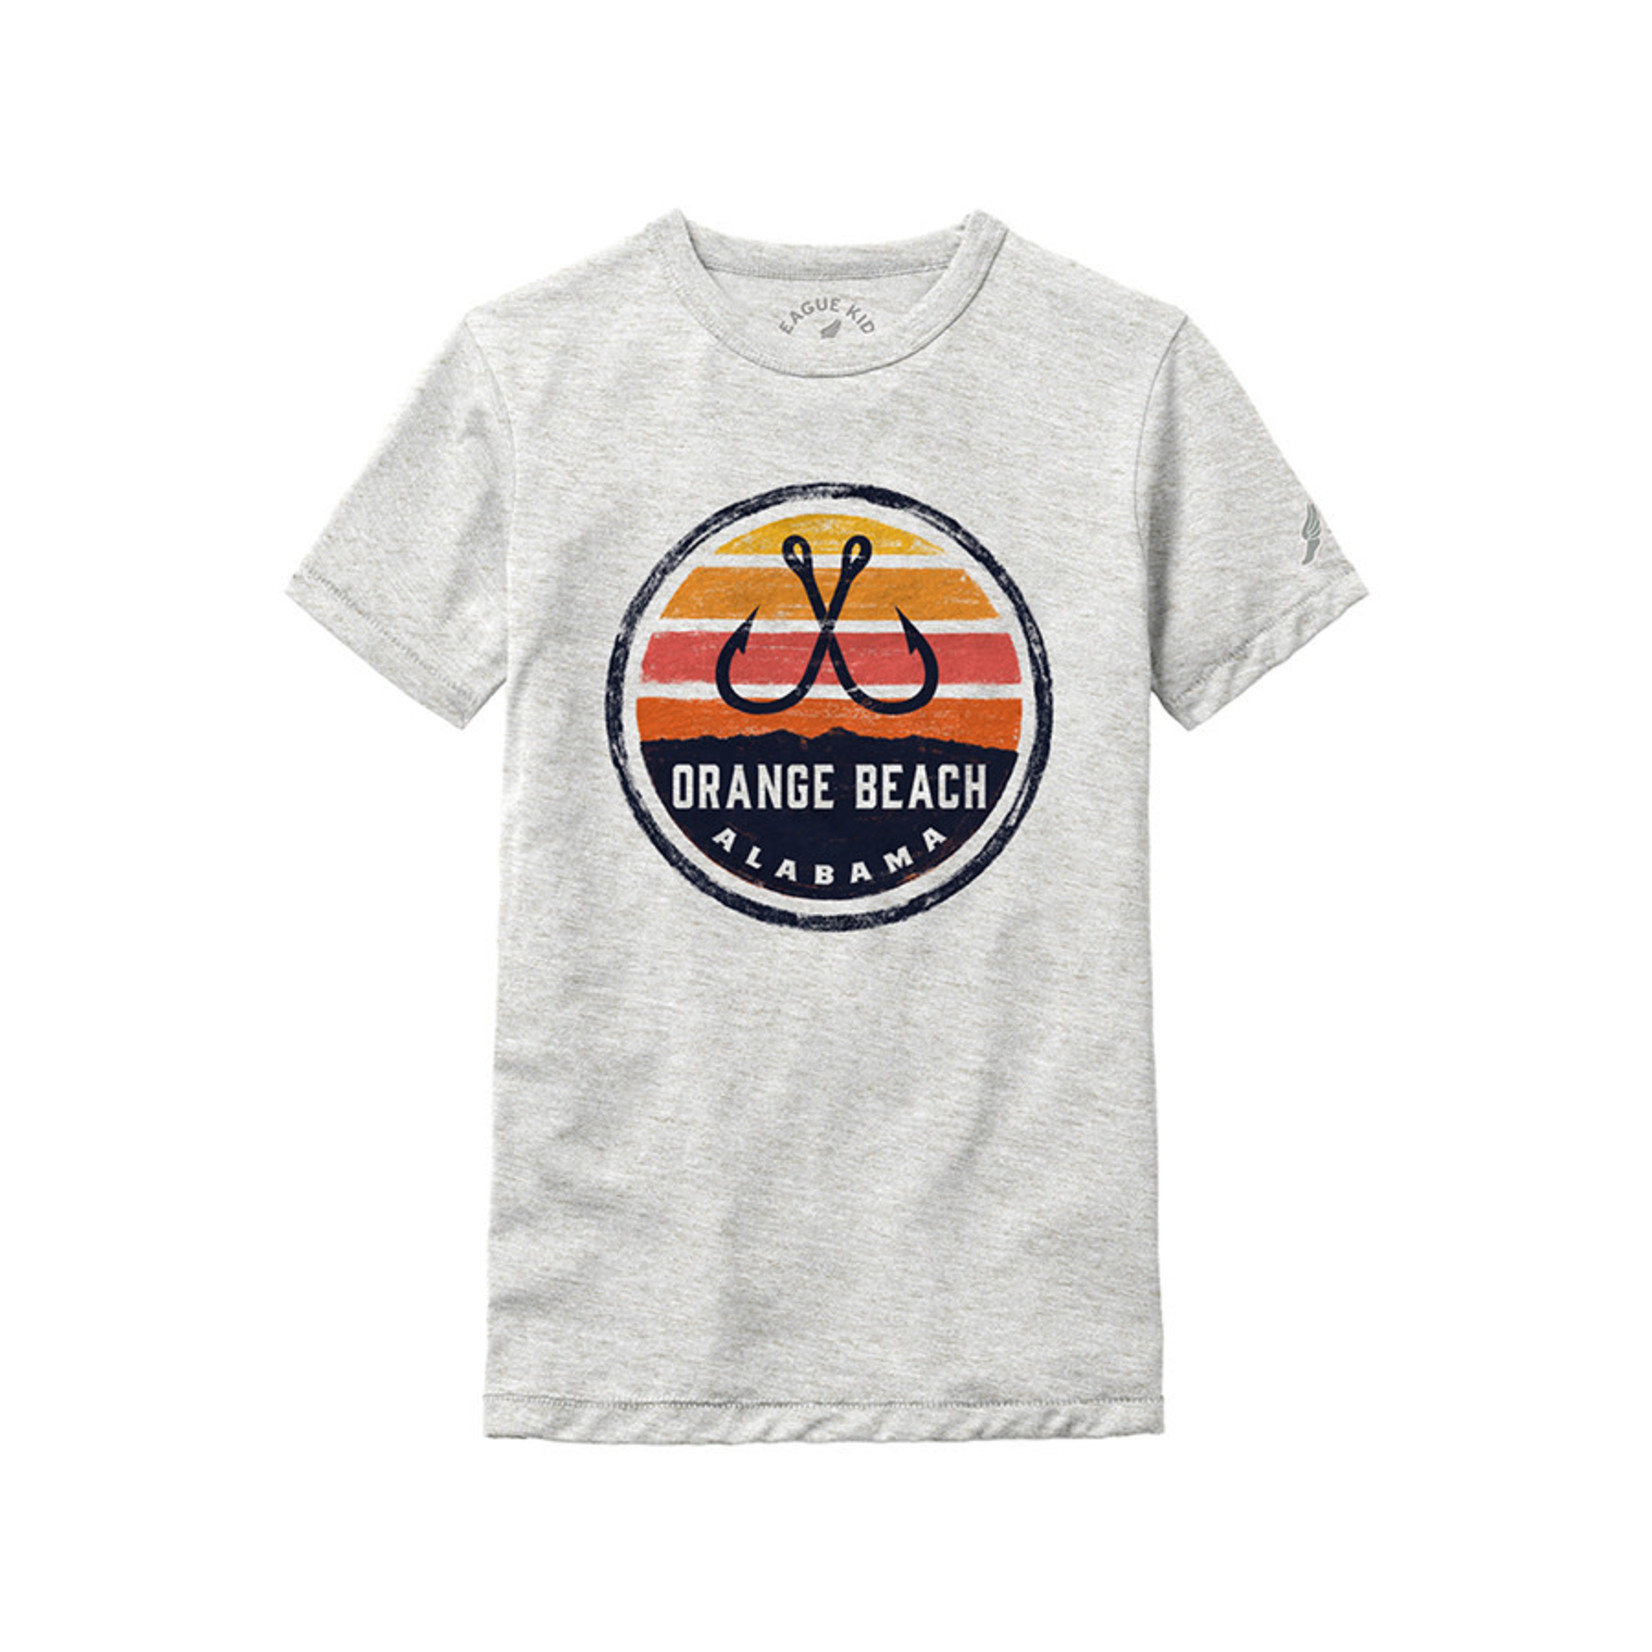 L2 Brands Youth Circle Hooks Victory Falls Tee